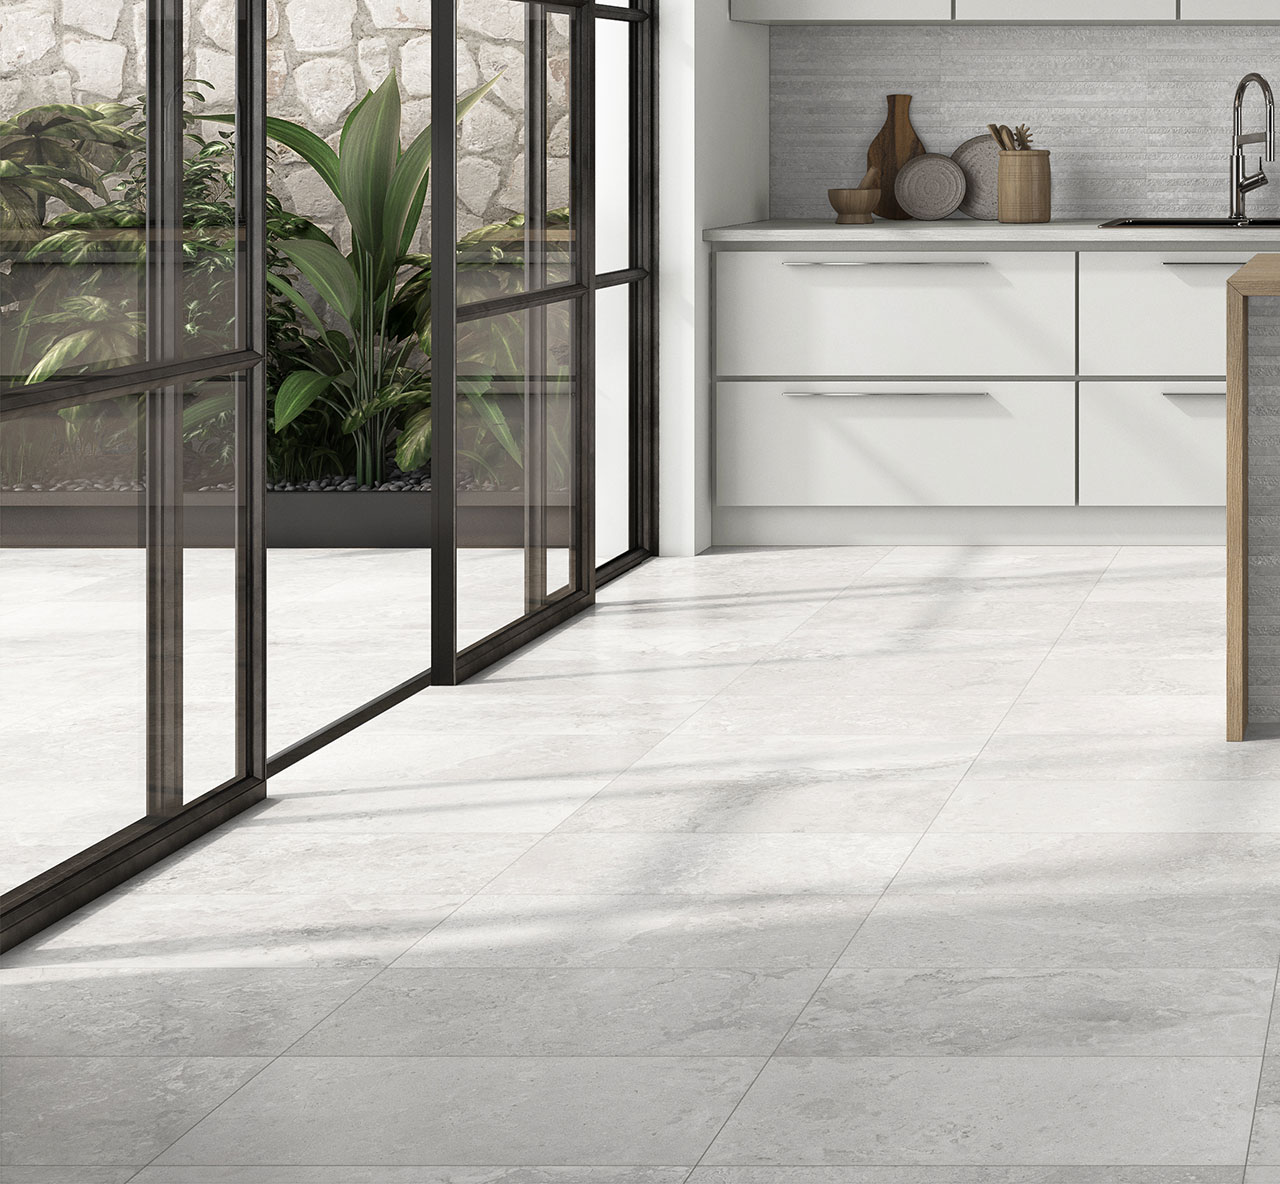 Tranquil Tone Silver Stone Effect Floor Tiles used in a naturally lit modern kitchen